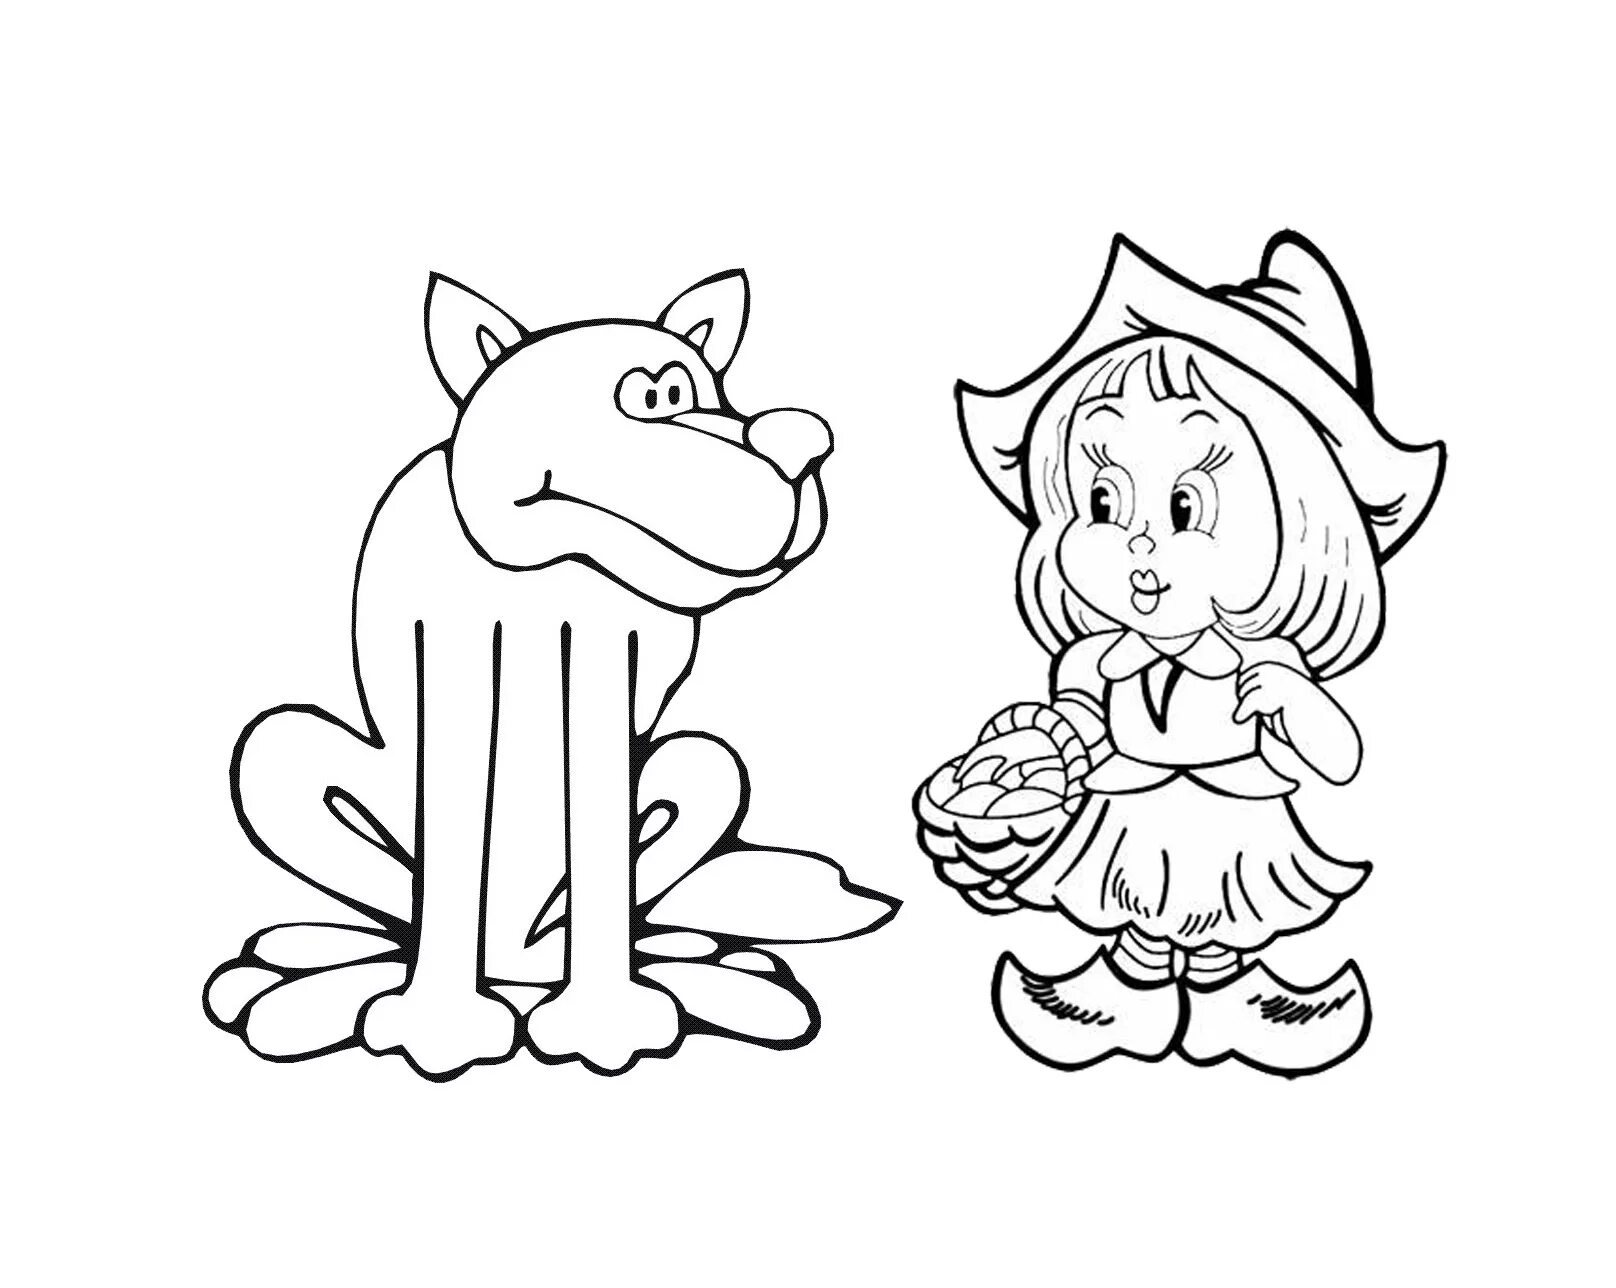 Coloring page graceful gray wolf and little red riding hood